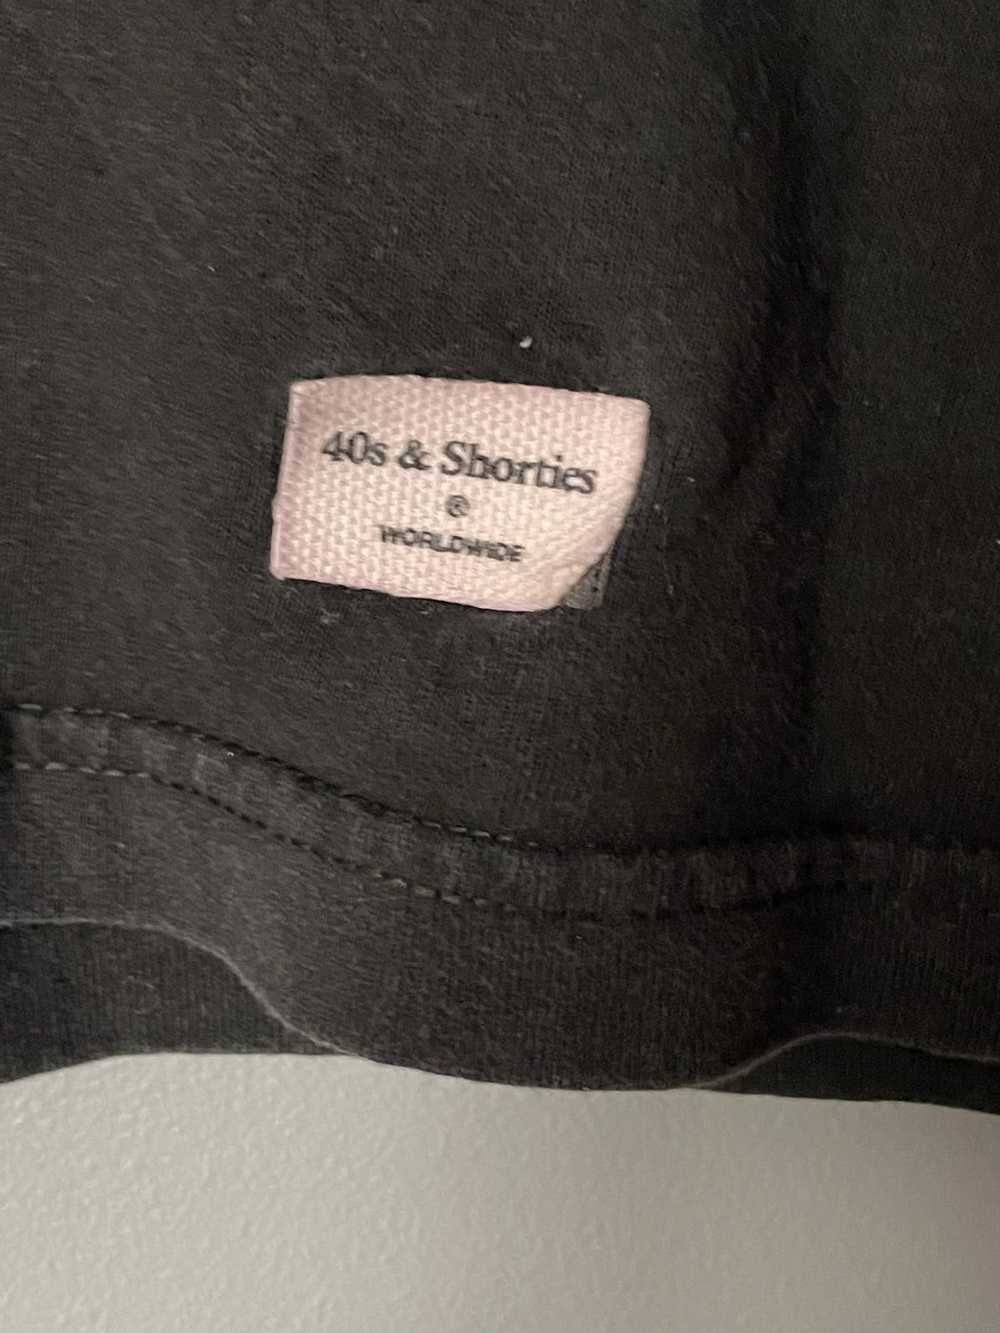 40's & Shorties Two Cup Tee - image 4